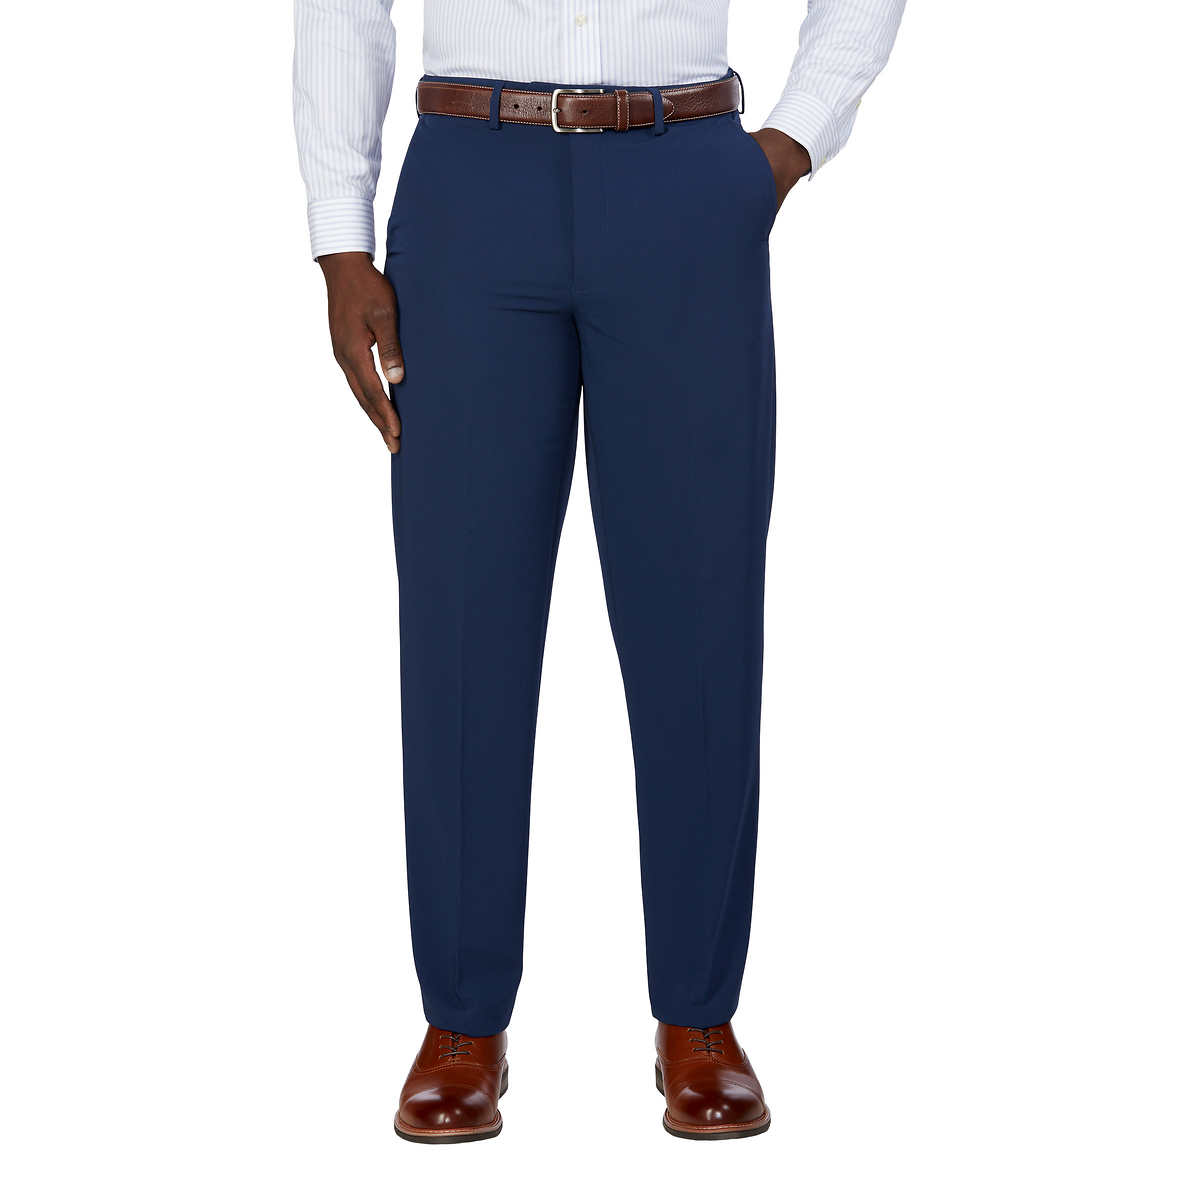 Dress Pant for Men EXPORT QUALITY fabric and stitching for every day office  use - Premium Quality Stylish Dress Pant for Men